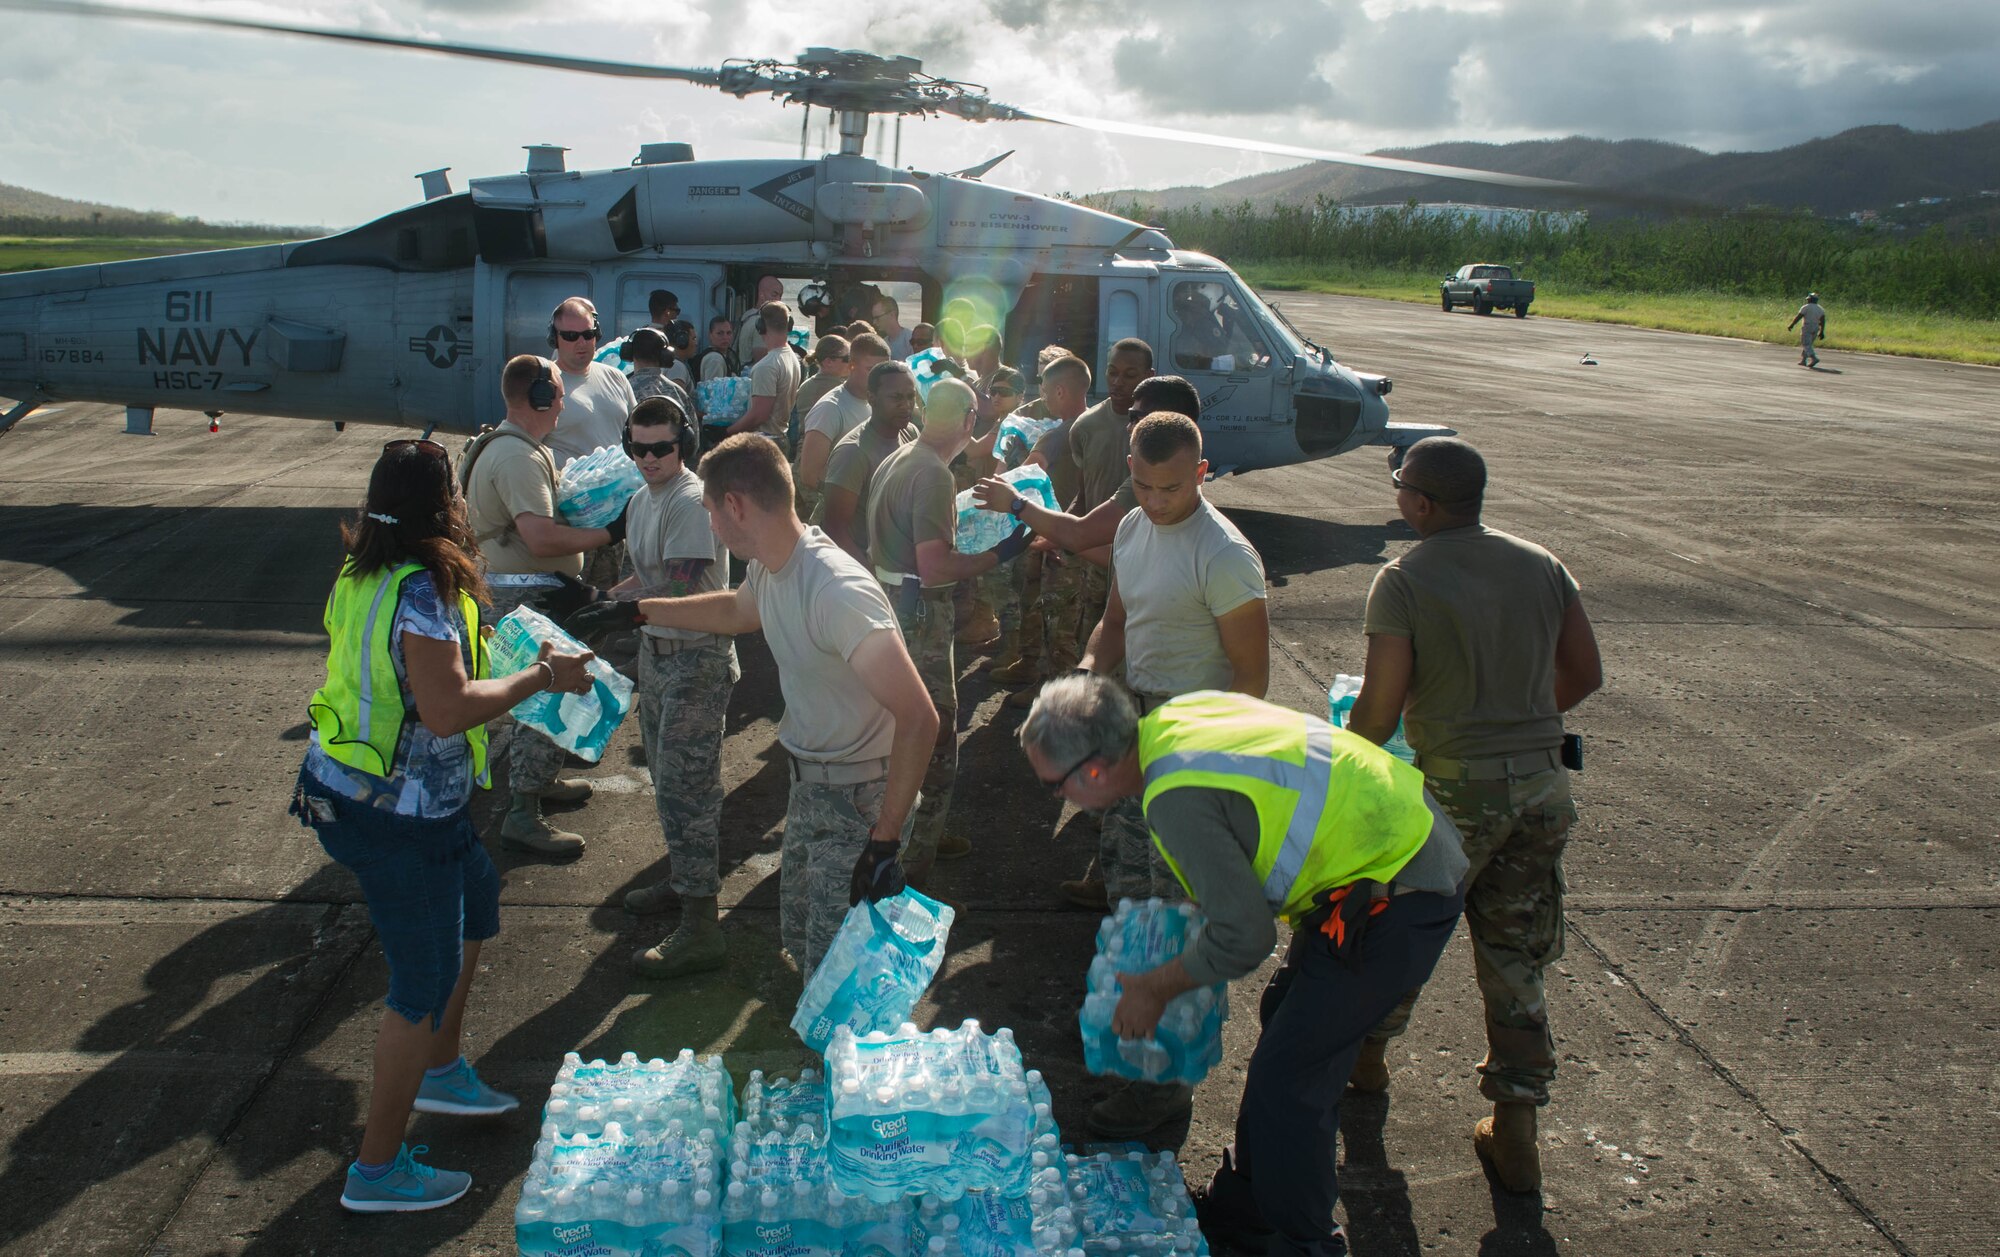 Airmen along side Soldiers and FEMA employees load food and water onto a U.S. Navy HH-60 Seahawk helicopter at Roosevelt Roads, Puerto Rico, Oct. 13. Joint Task Force-Puerto Rico was established to provide FEMA with the unique capabilities that the Department of Defense can bring to the island following the devastation caused by Hurricane Maria (U.S. Air Force photo by Staff Sgt. Robert Hicks)